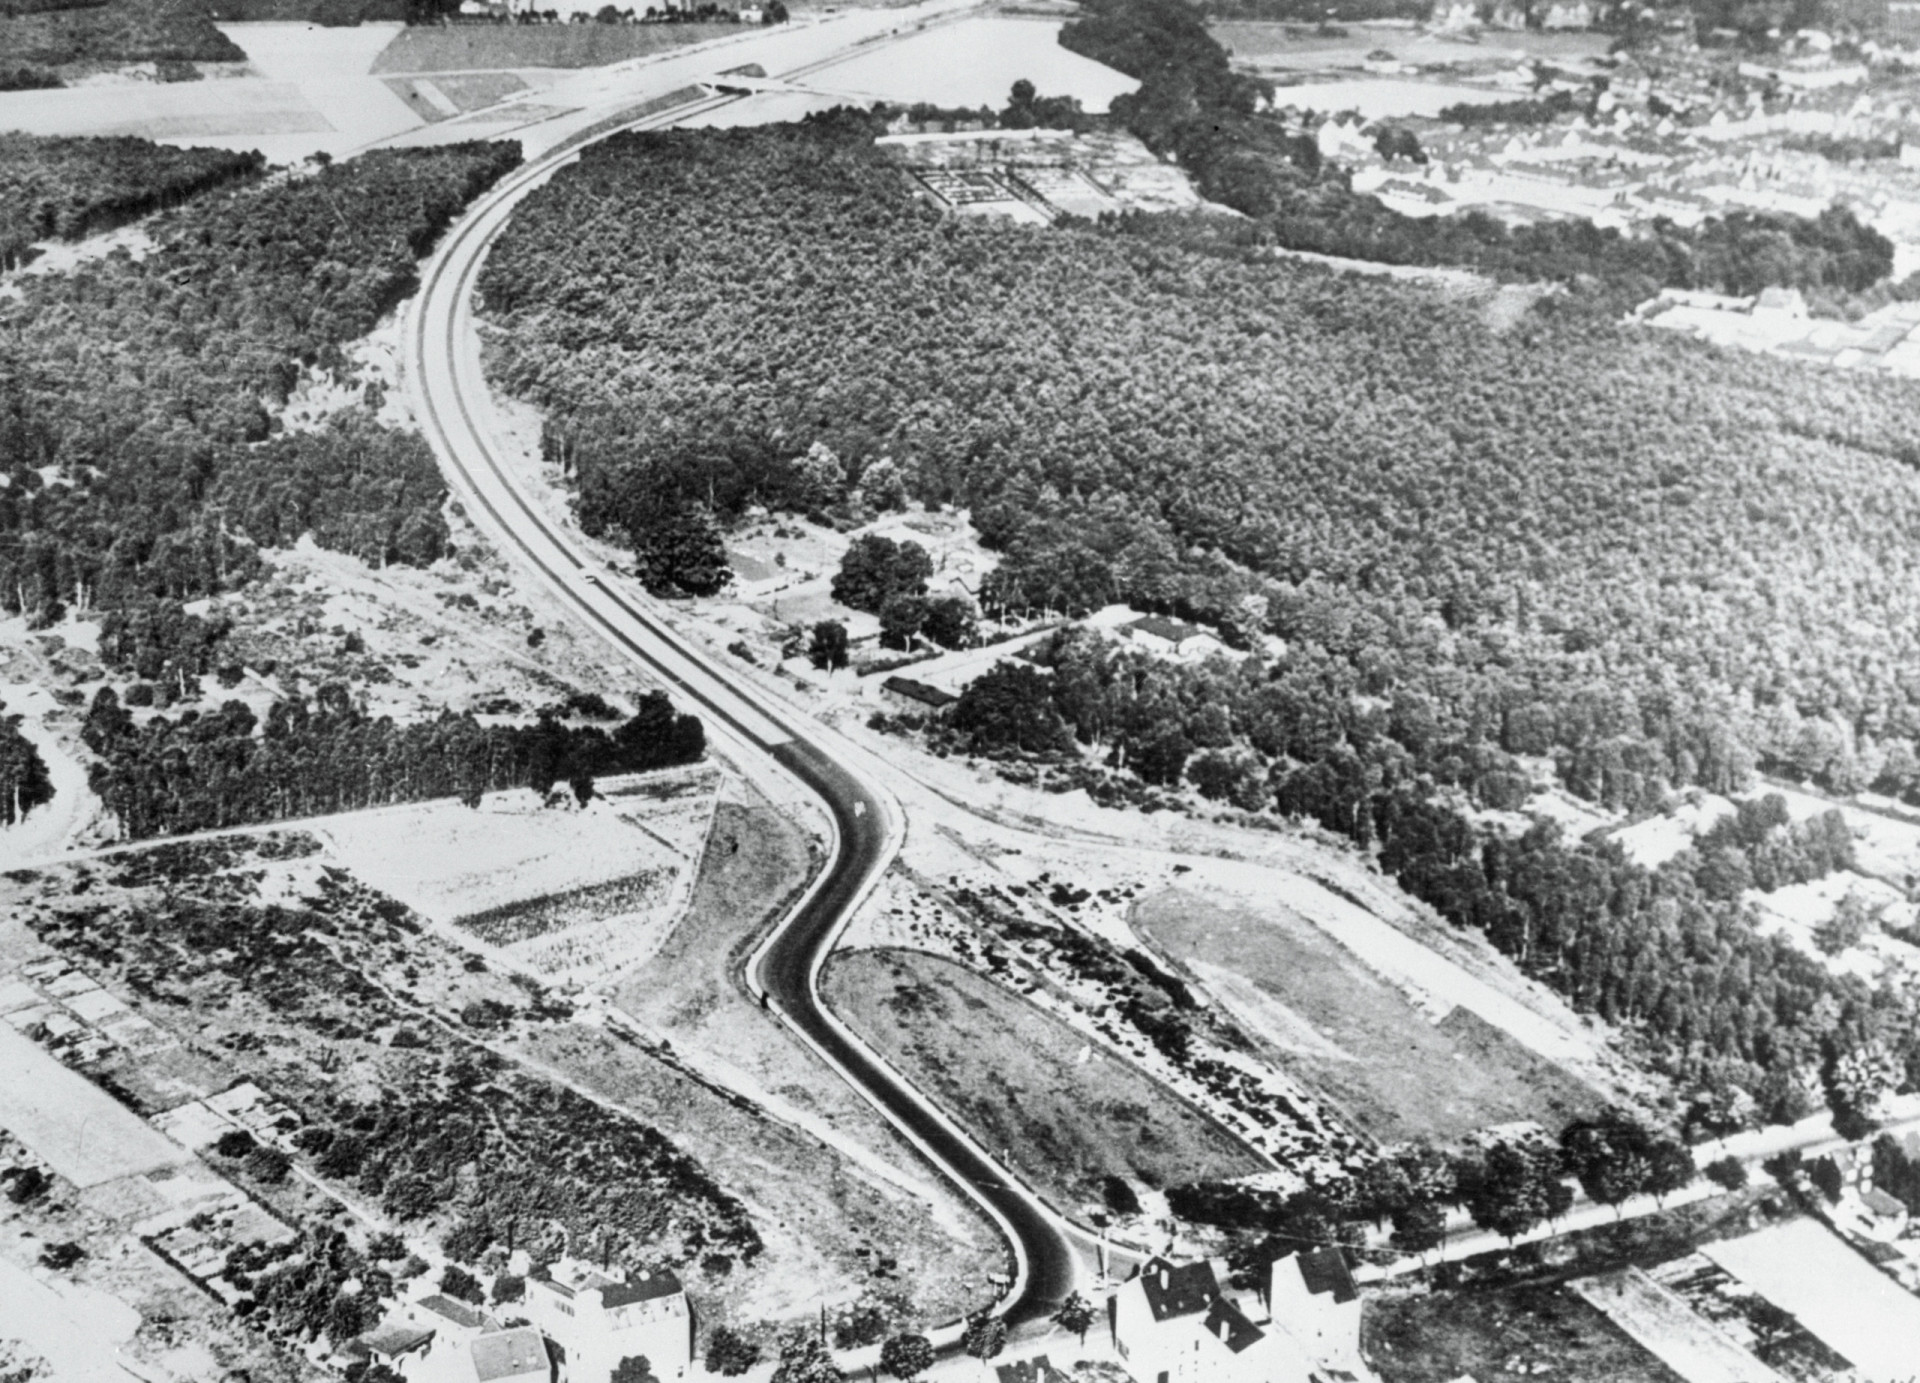 <p>Soon after Adolf Hitler came to power in 1933, the Nazi dictator approved an ambitious long-distance highway construction project. The Reichsautobahn system was the beginning of the German autobahns. This picture, taken from the Graf Zeppelin airship, shows the new highway between Cologne and Dusseldorf under construction.</p><p><a href="https://www.msn.com/en-us/community/channel/vid-7xx8mnucu55yw63we9va2gwr7uihbxwc68fxqp25x6tg4ftibpra?cvid=94631541bc0f4f89bfd59158d696ad7e">Follow us and access great exclusive content every day</a></p>